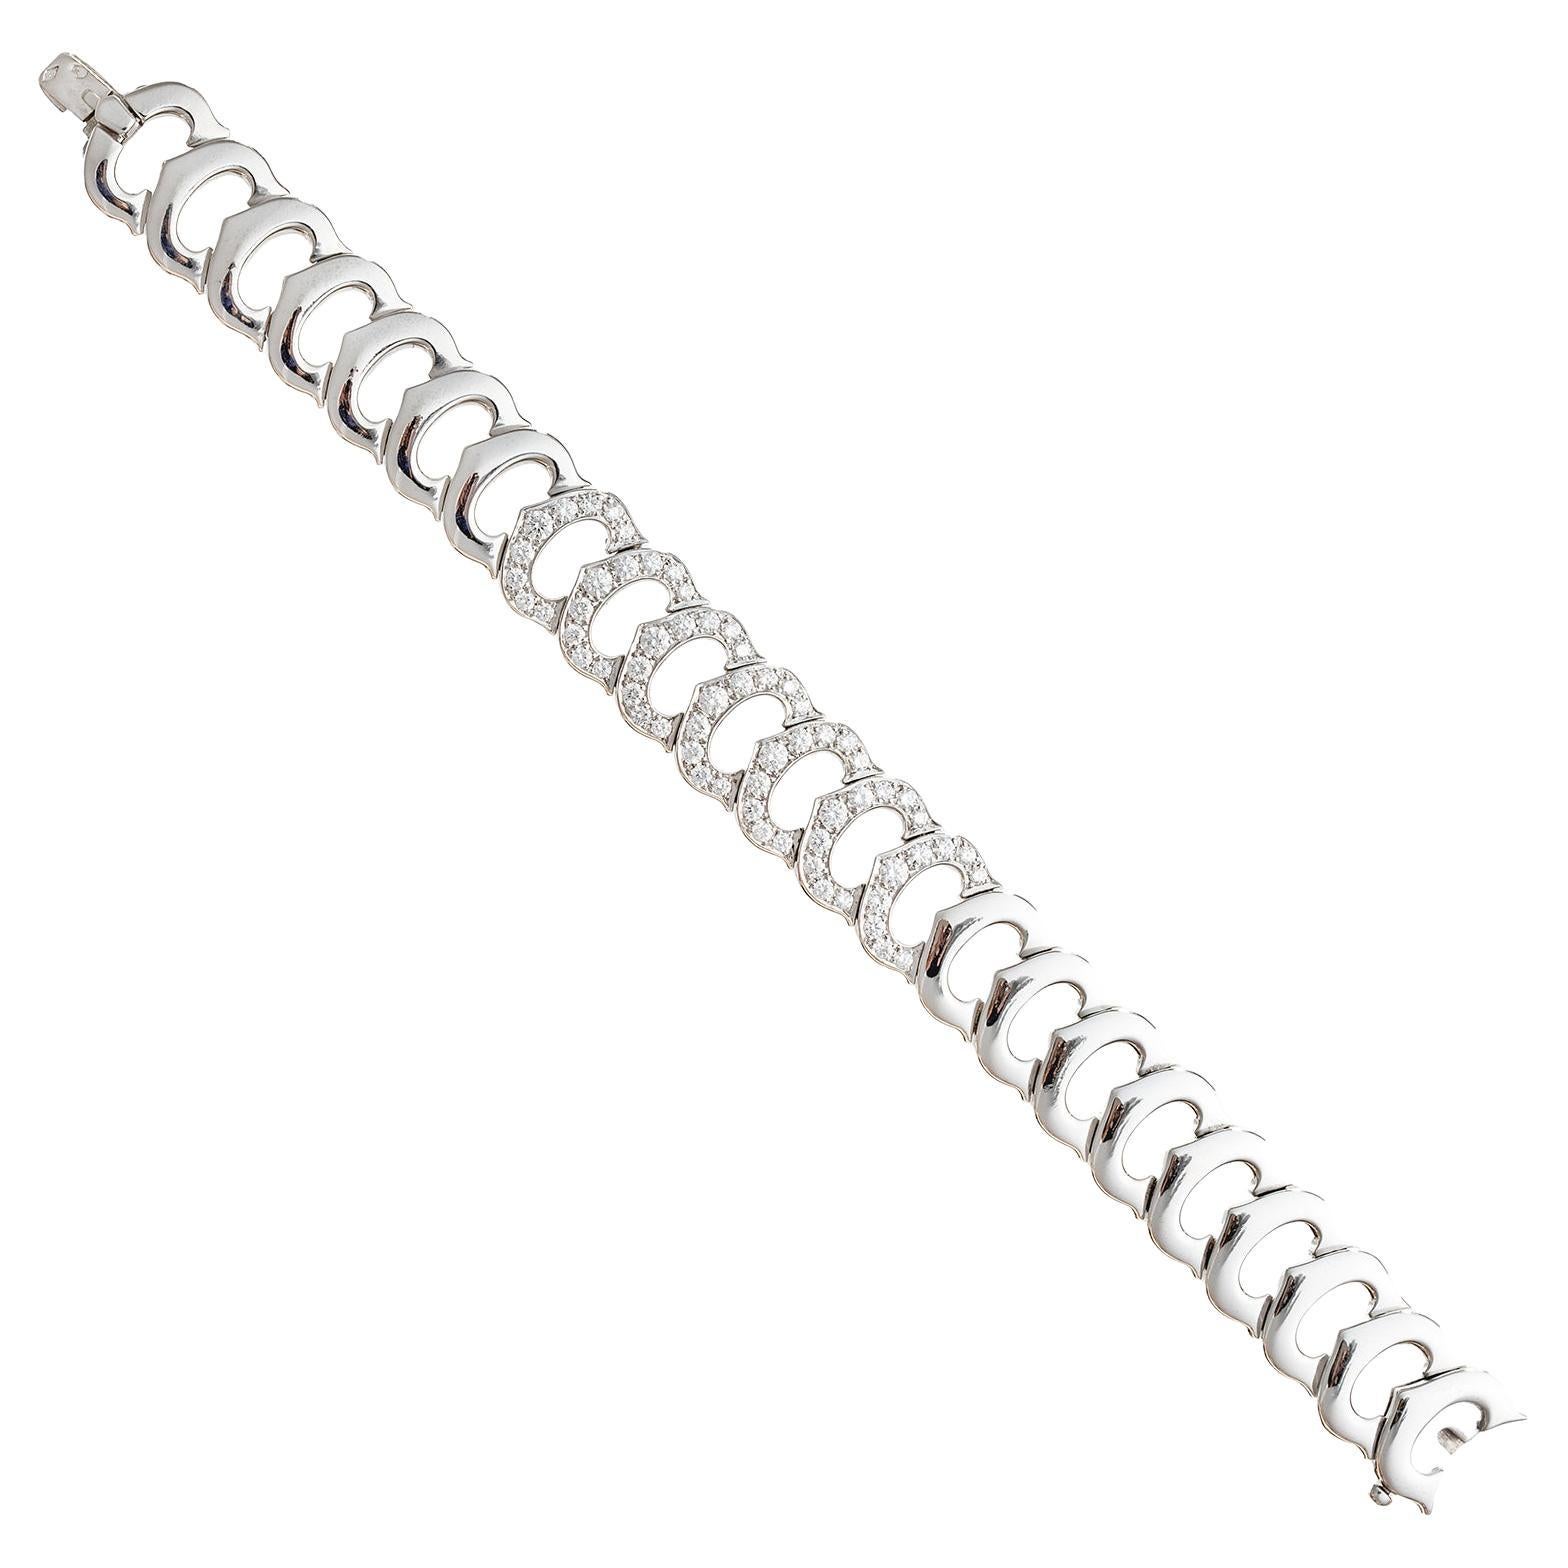 'C' de Cartier link bracelet, featuring horizontally joined 'C' logo motif links in polished 18k white gold accented by seven links at center set with round brilliant-cut diamonds.  63 diamonds weighing approximately 3.50 total carats.  Signed